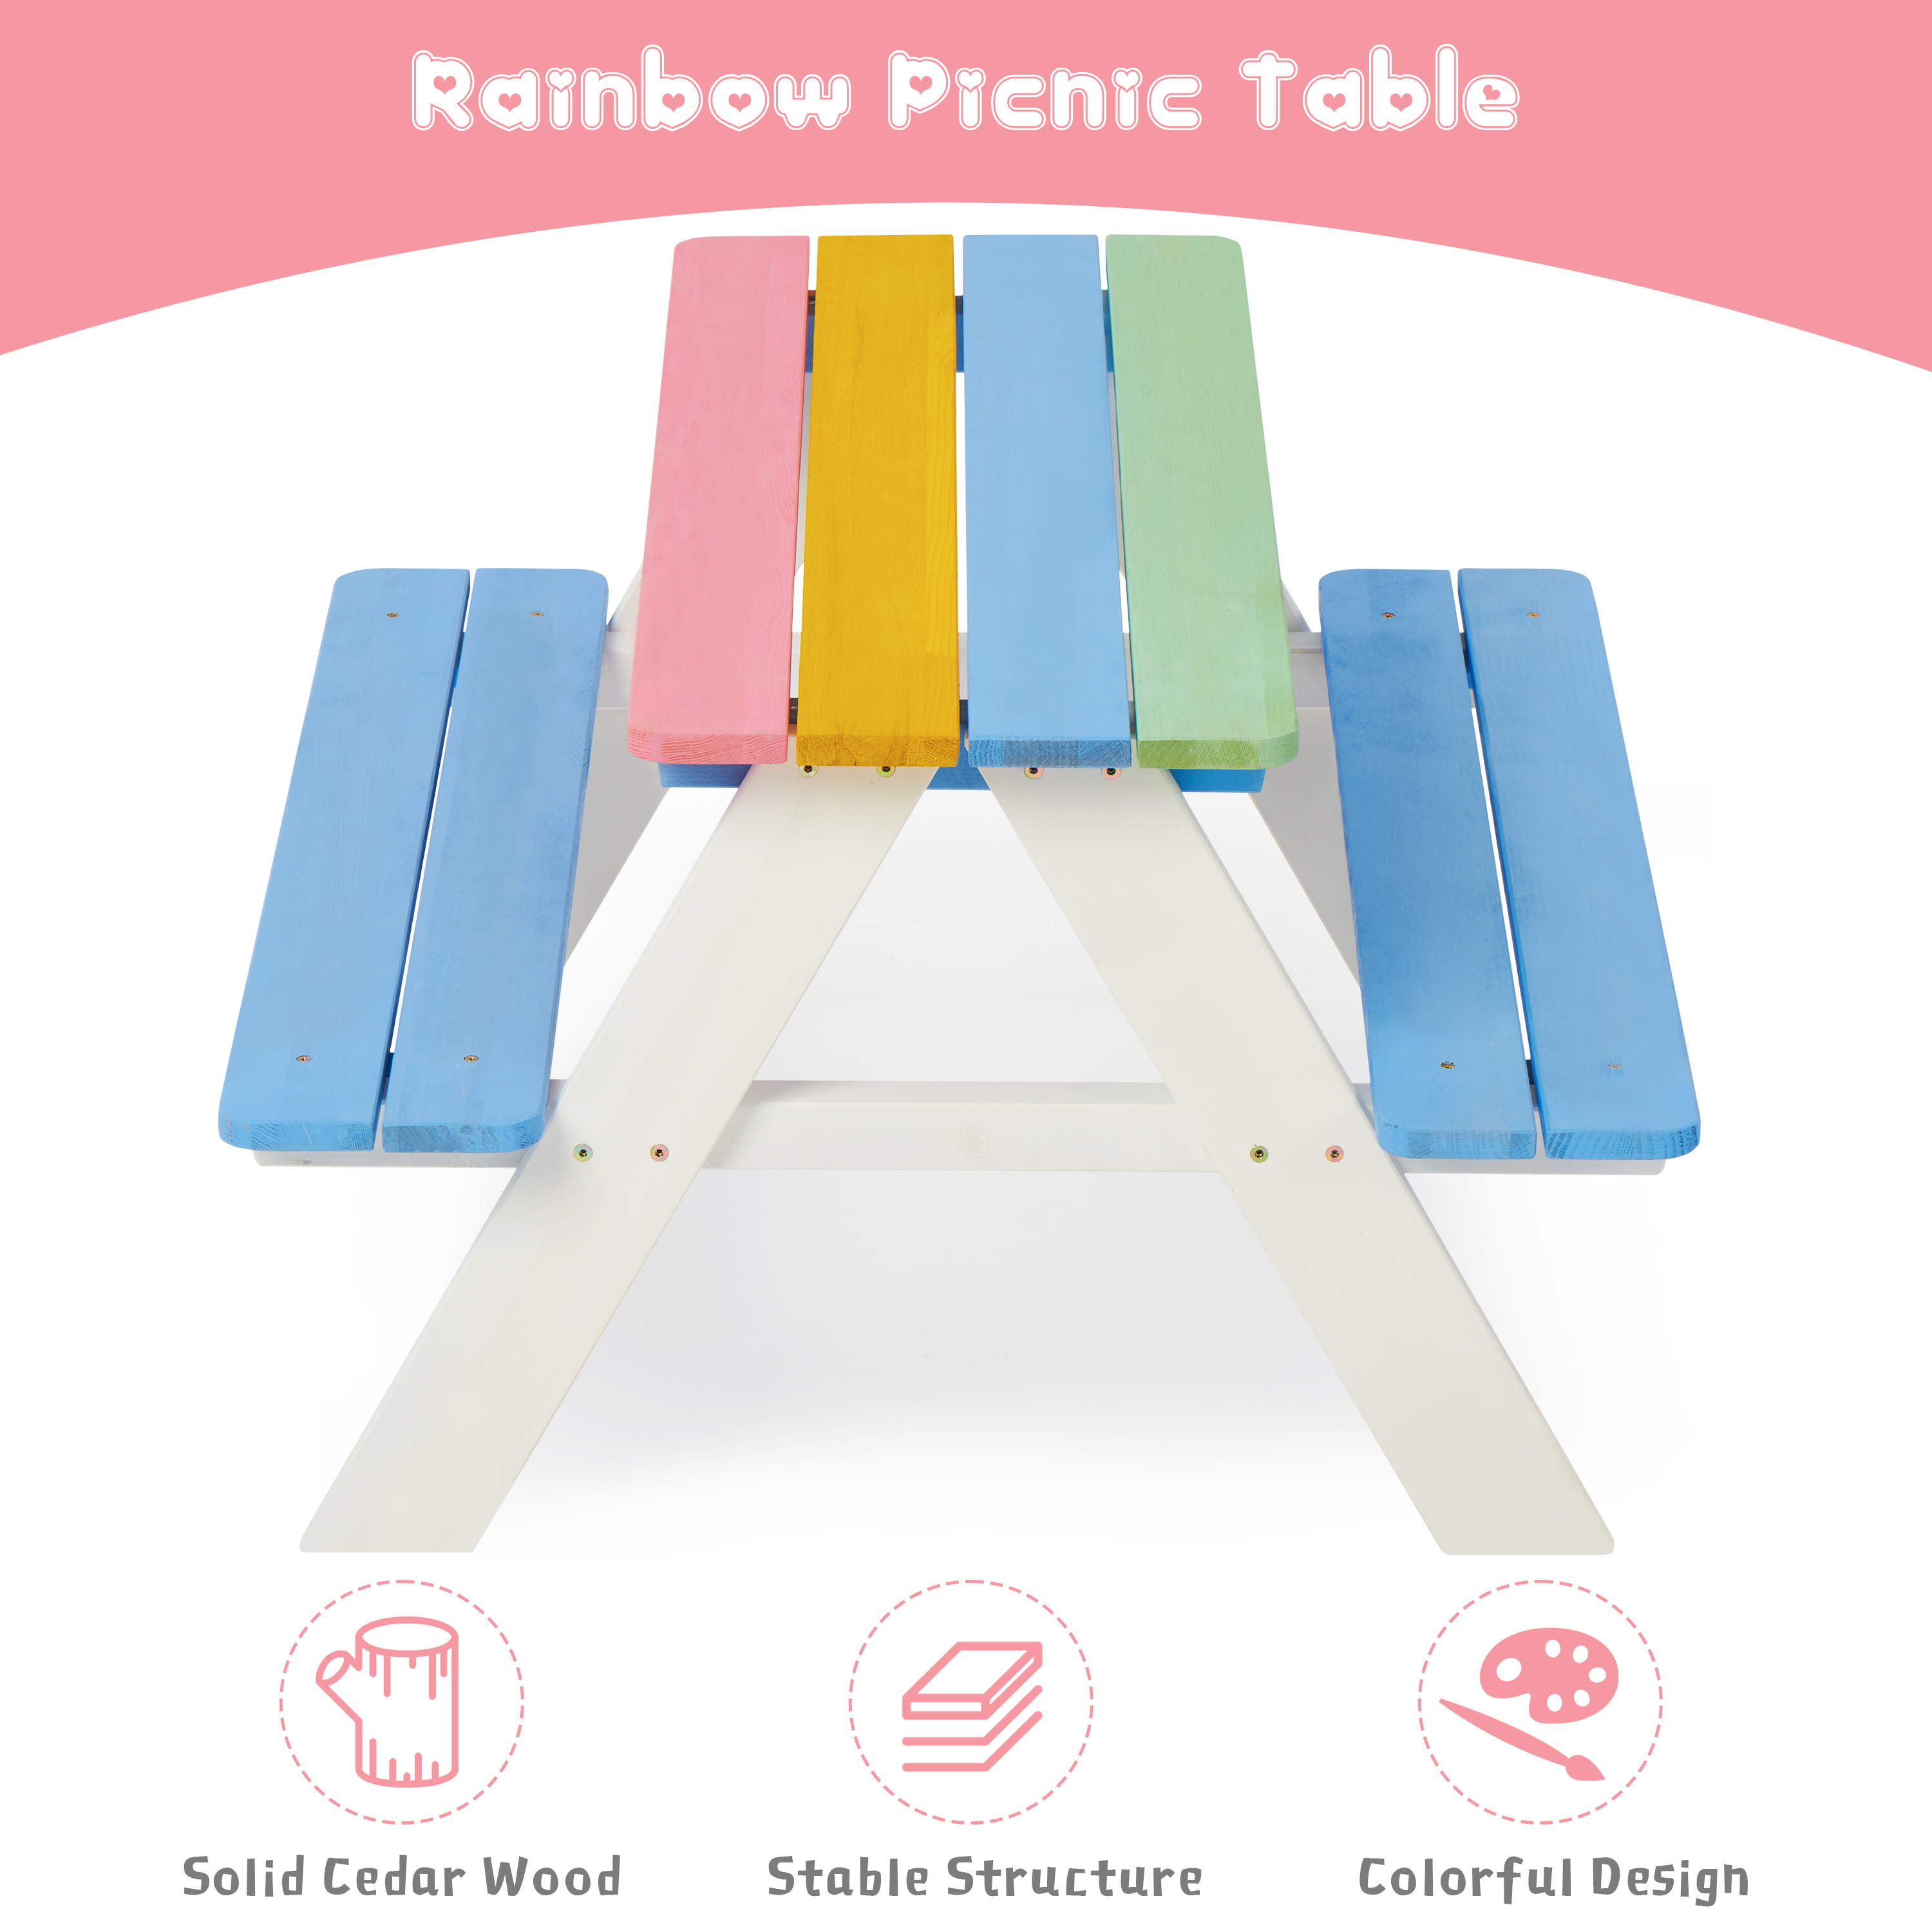 D-road Outdoor Kids Picnic Table & Bench Set, Cedar Wood, Rainbow Color - image 2 of 6